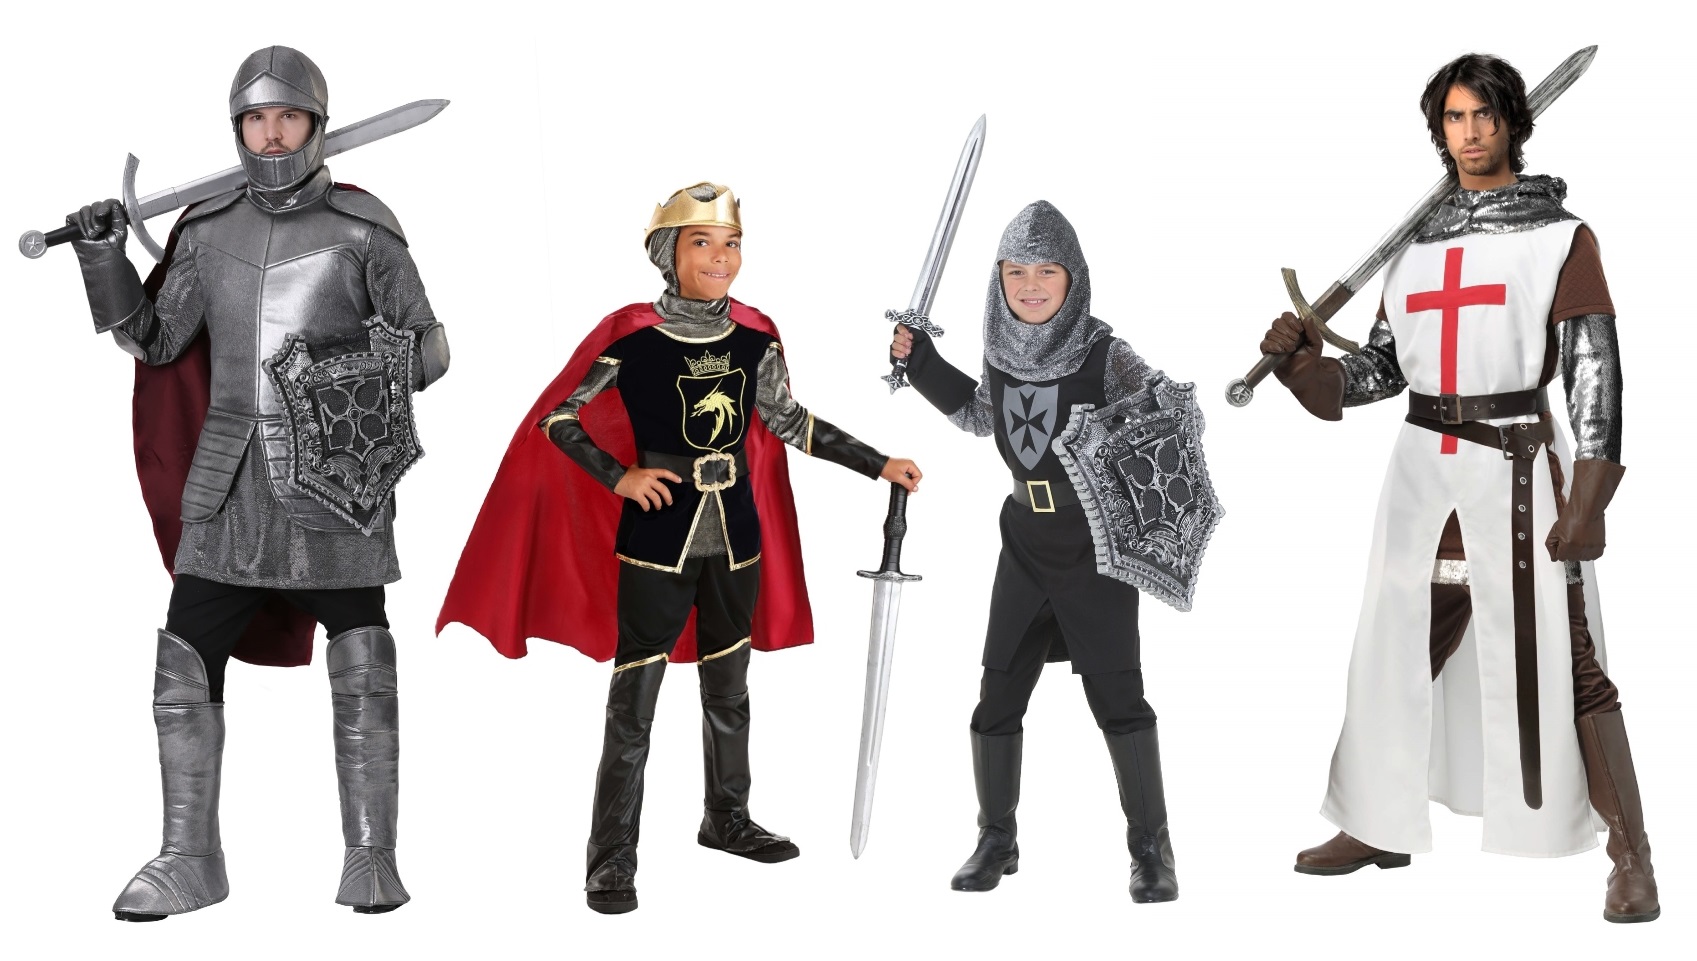 Shop all Knight Costumes